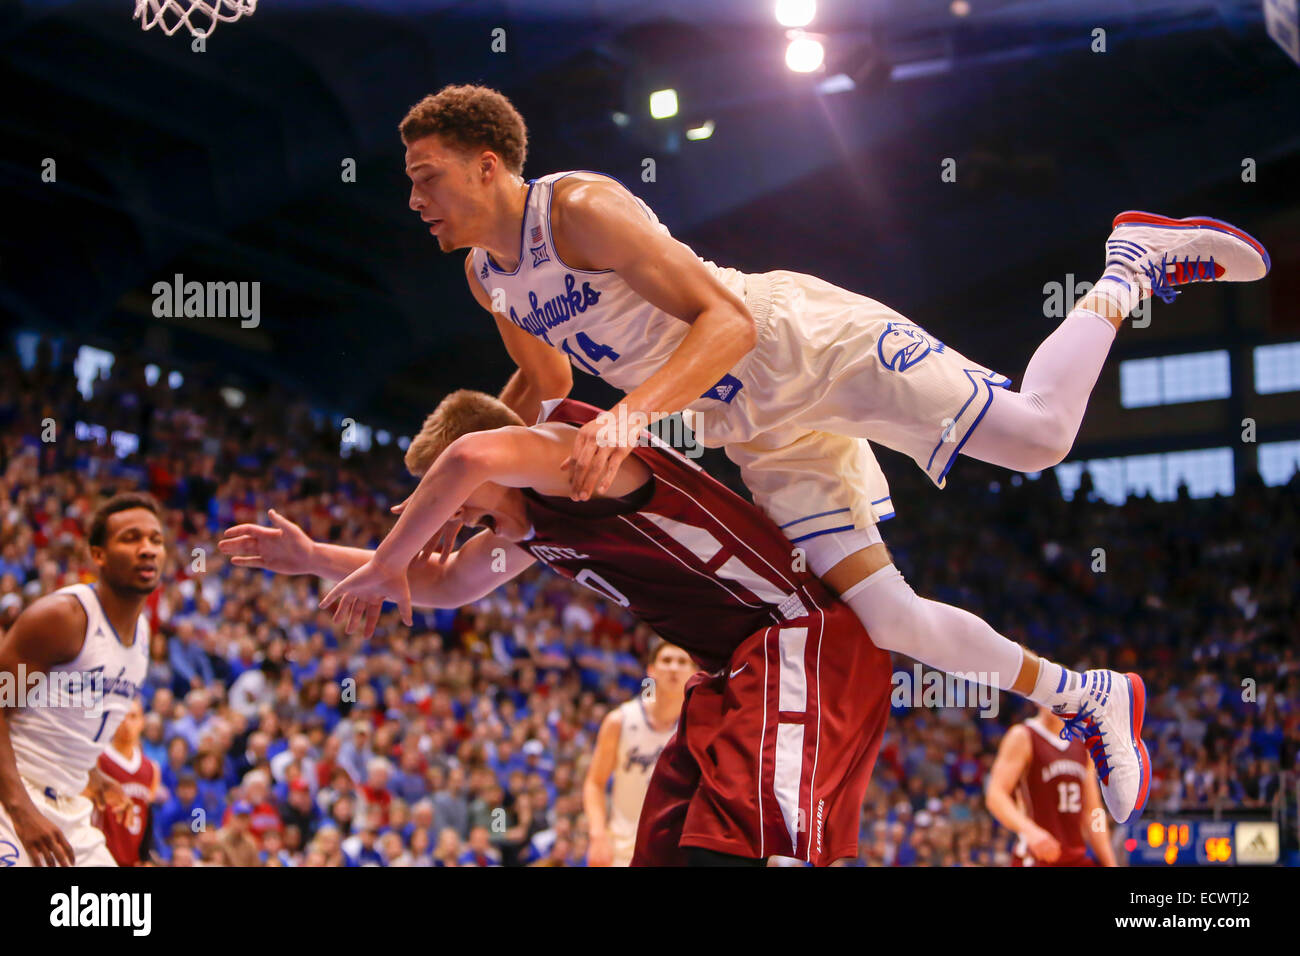 Lawrence, Kansas, USA. 20th Dec, 2014. December 20, 2014: Brannen Greene #14 of the Kansas Jayhawks fouls Dan Trist #20 of the Lafayette Leopards late in the second half during the NCAA basketball game between the Lafayette Leopards and the Kansas Jayhawks at Allen Fieldhouse in Lawrence, KS Credit:  Cal Sport Media/Alamy Live News Stock Photo